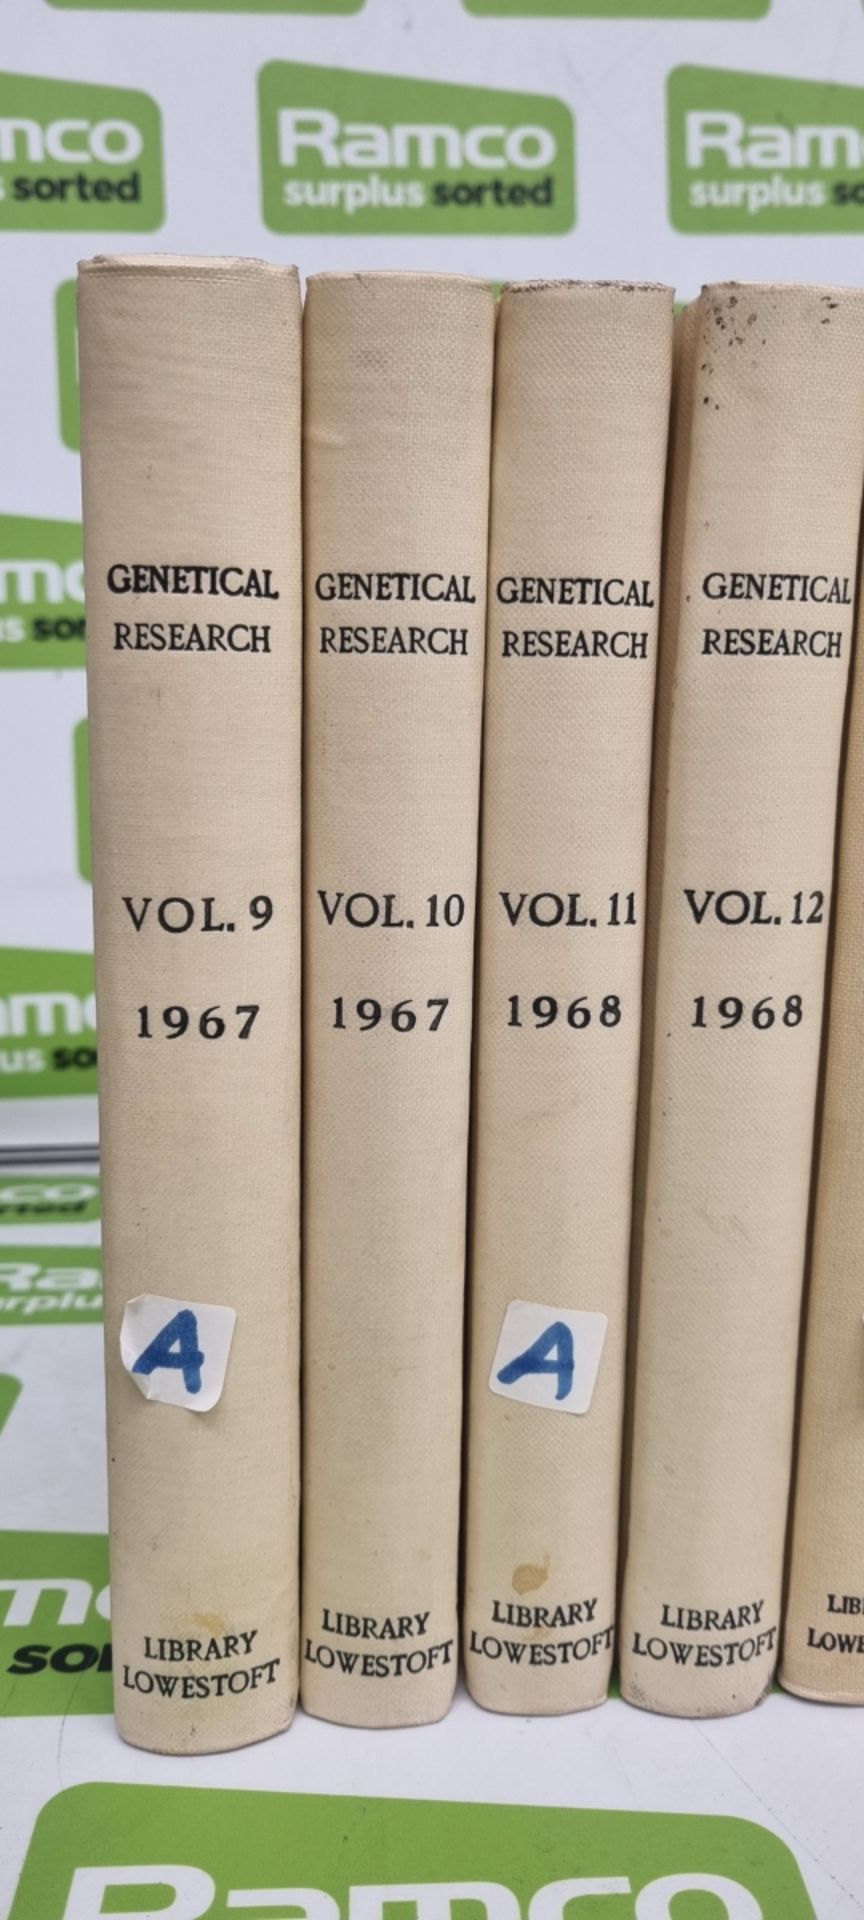 Genetical Research books - Volumes 9 to 25 - Image 2 of 4